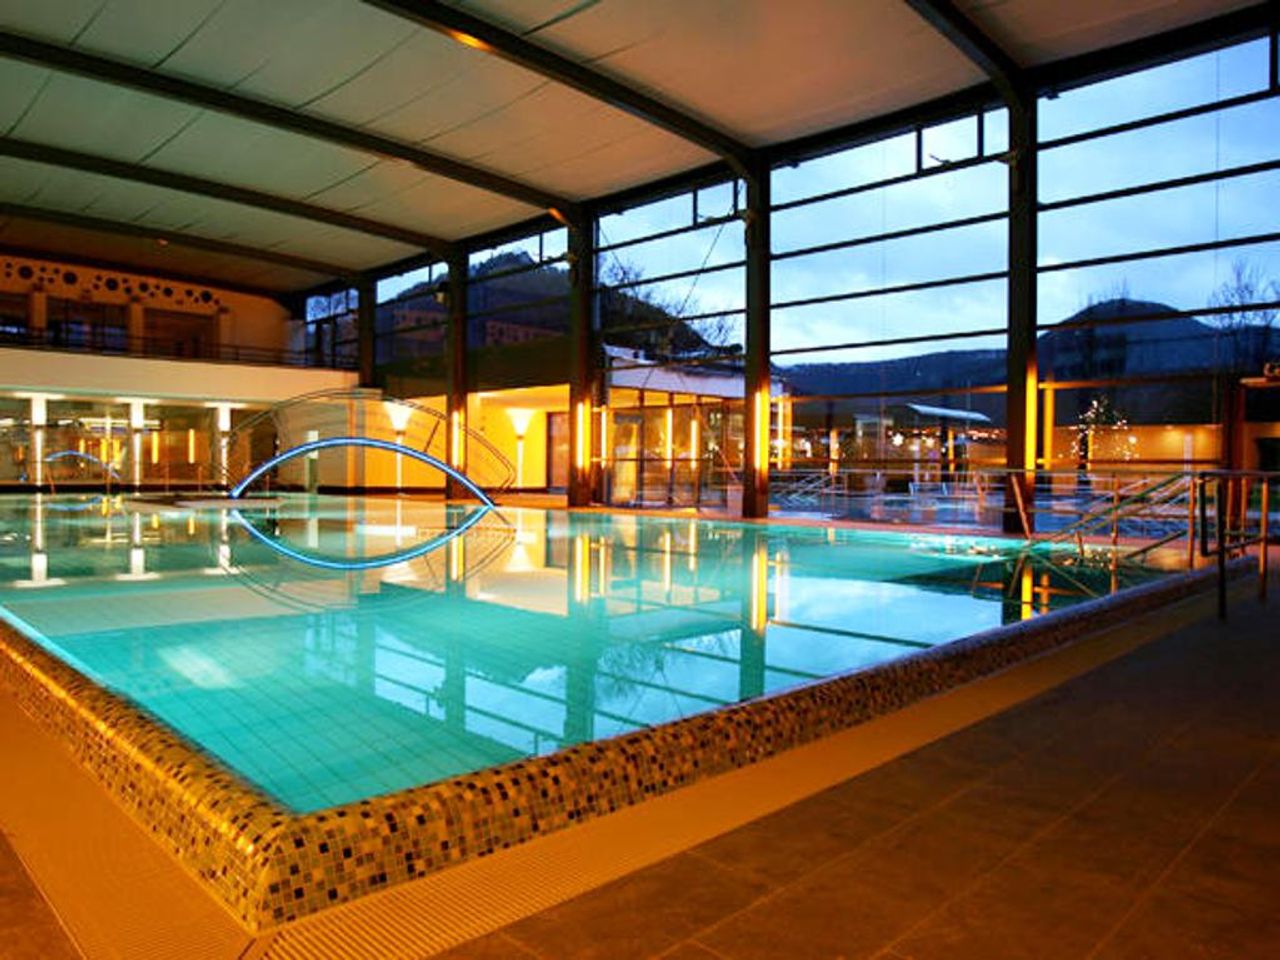 4 Tage pure Entspannung mit AlbCard und Therme